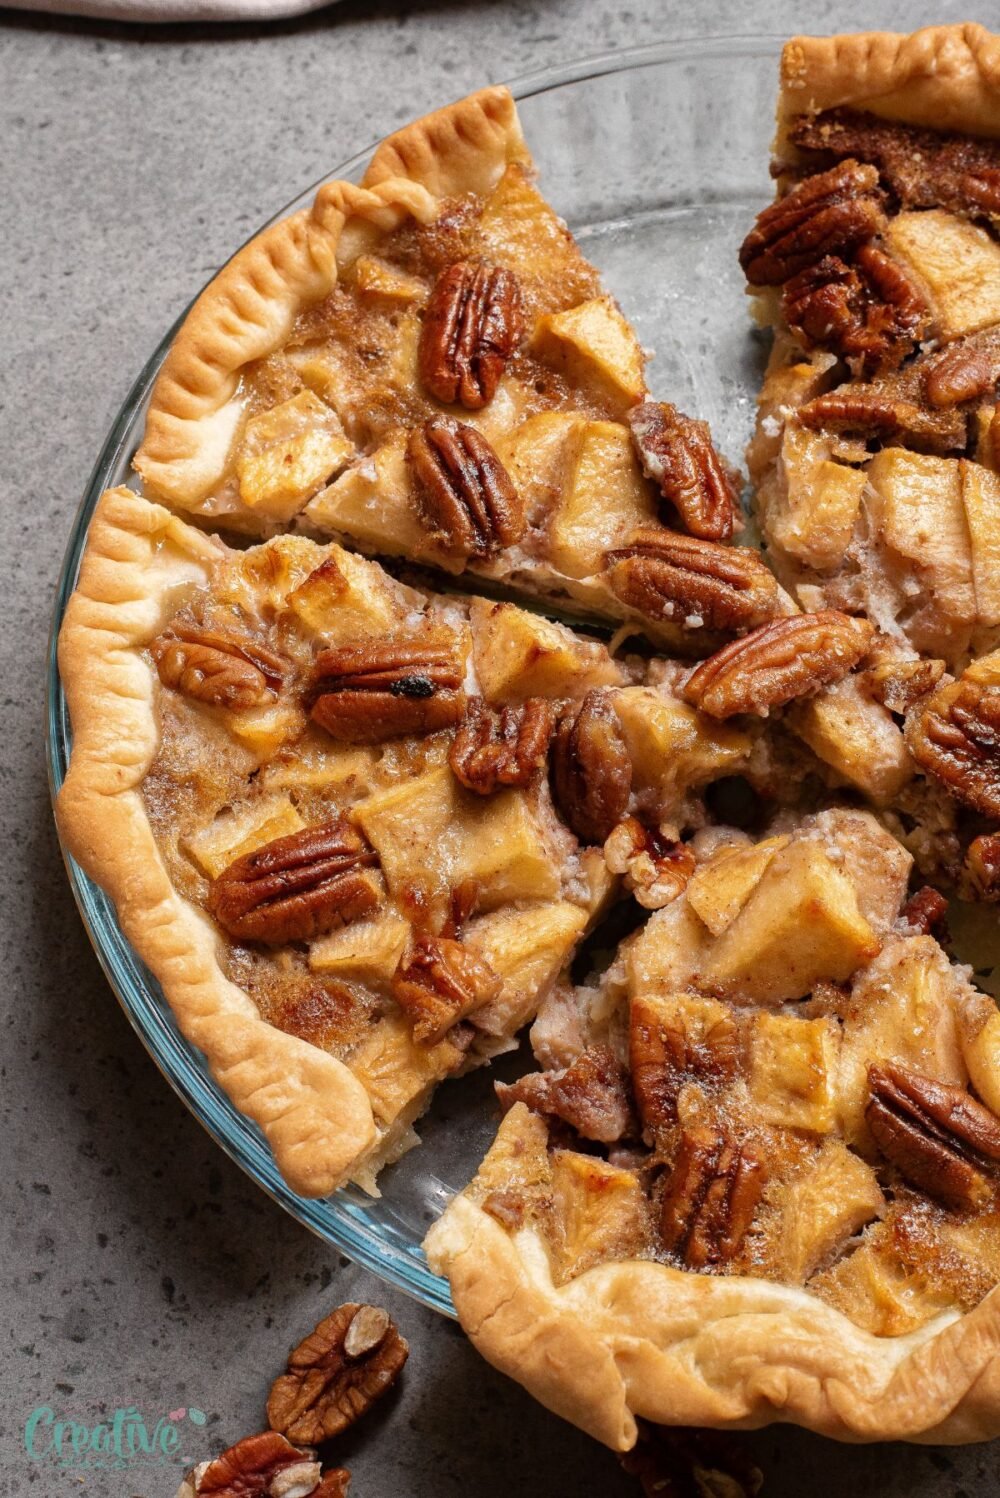 Apple Pecan Pie with Bourbon is one of my all-time favorite desserts because it perfectly balances sweetness with a subtle hint of alcohol.